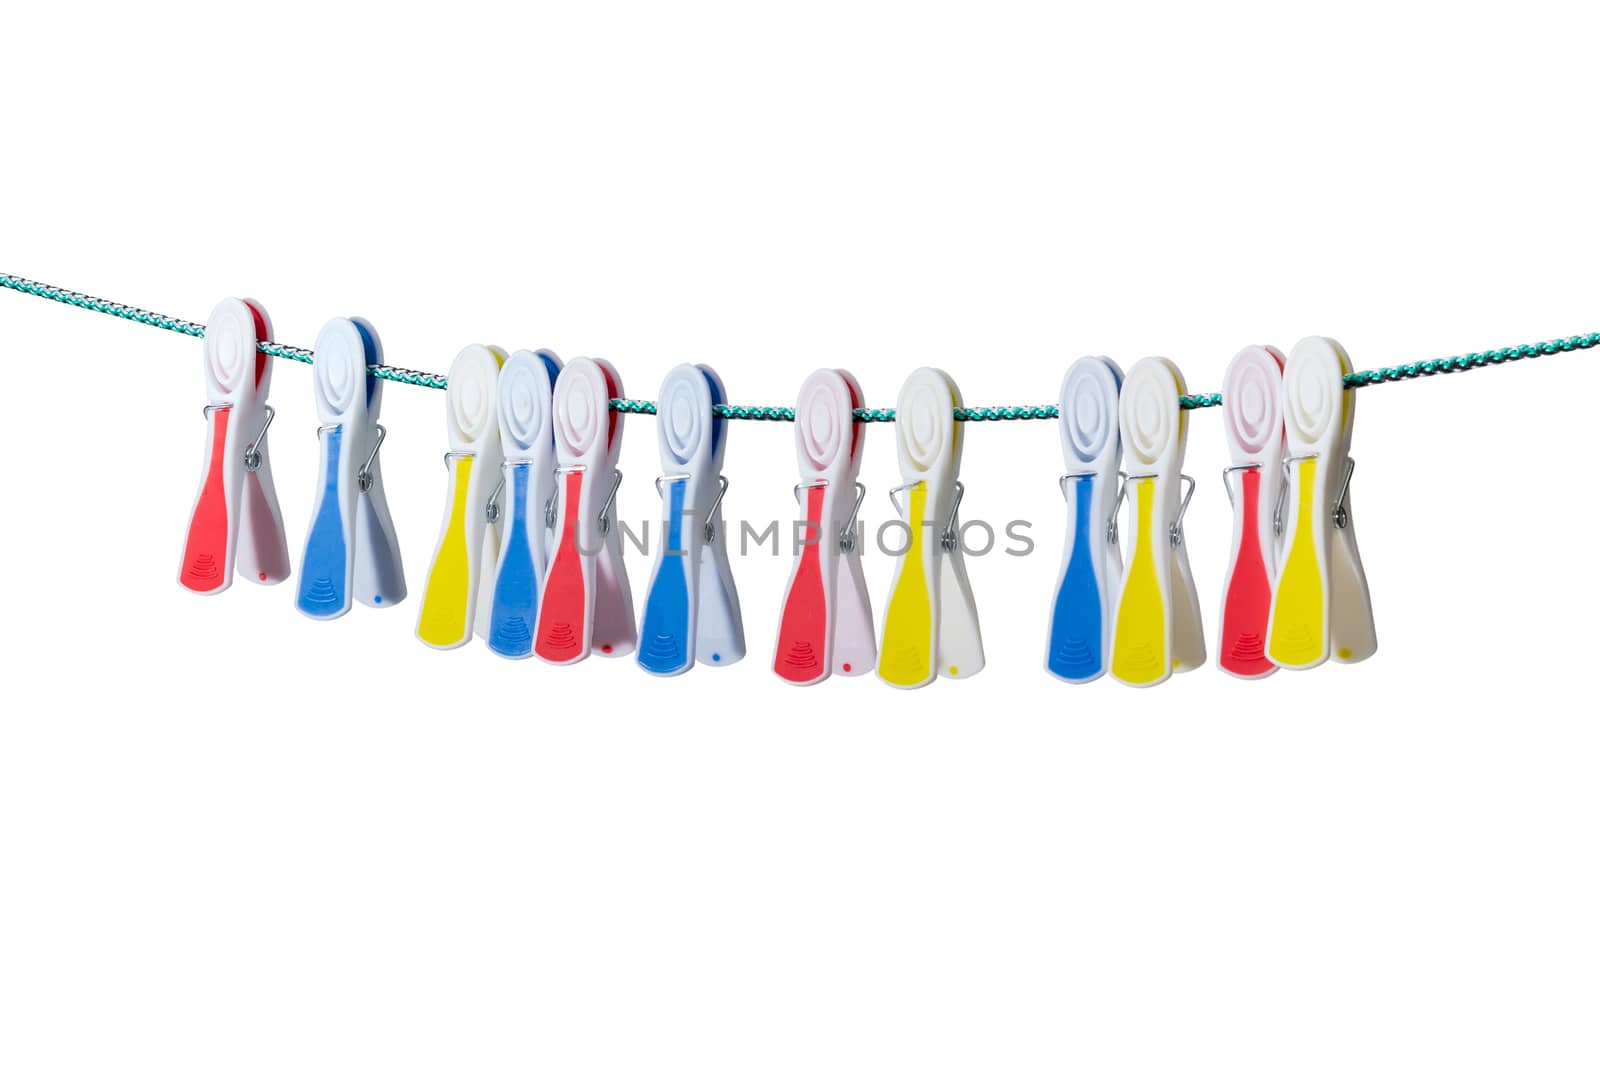 Several spring-type plastic clothespins with varicolored rubber inserts hanging on the clothes line on a light background
